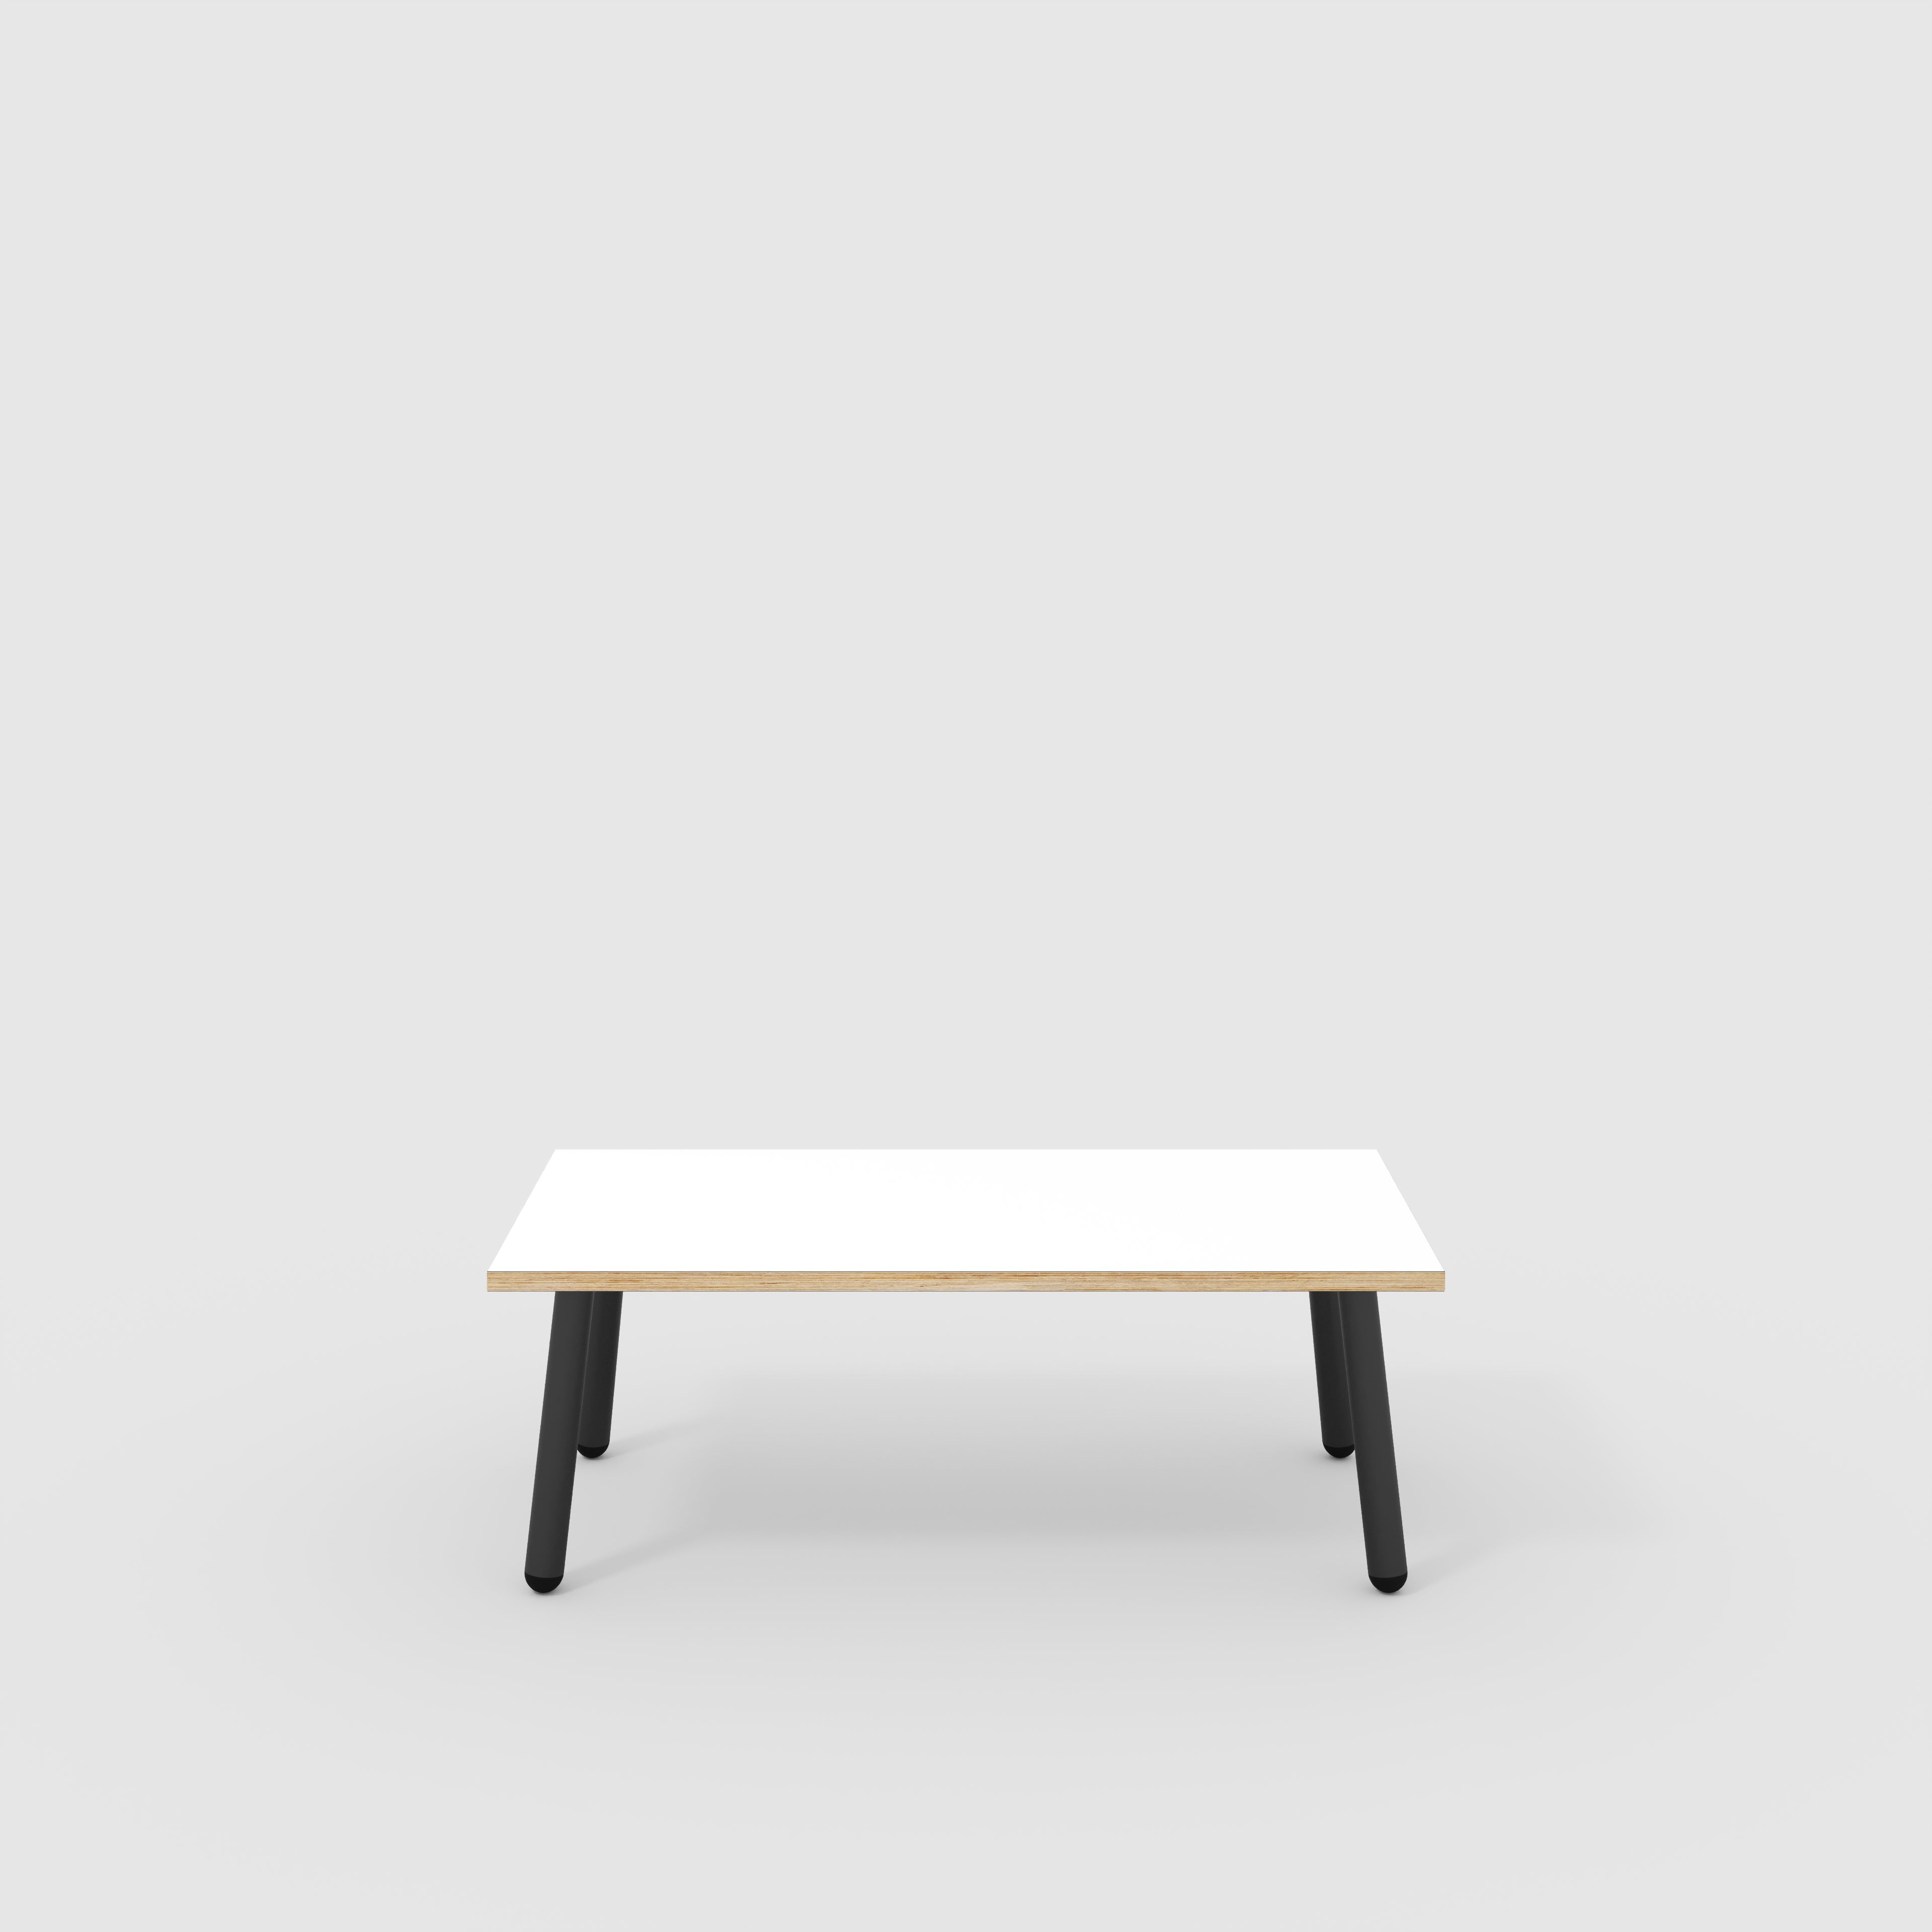 Coffee Table with Black Round Single Pin Legs - Formica White - 1200(w) x 600(d) x 425(h)